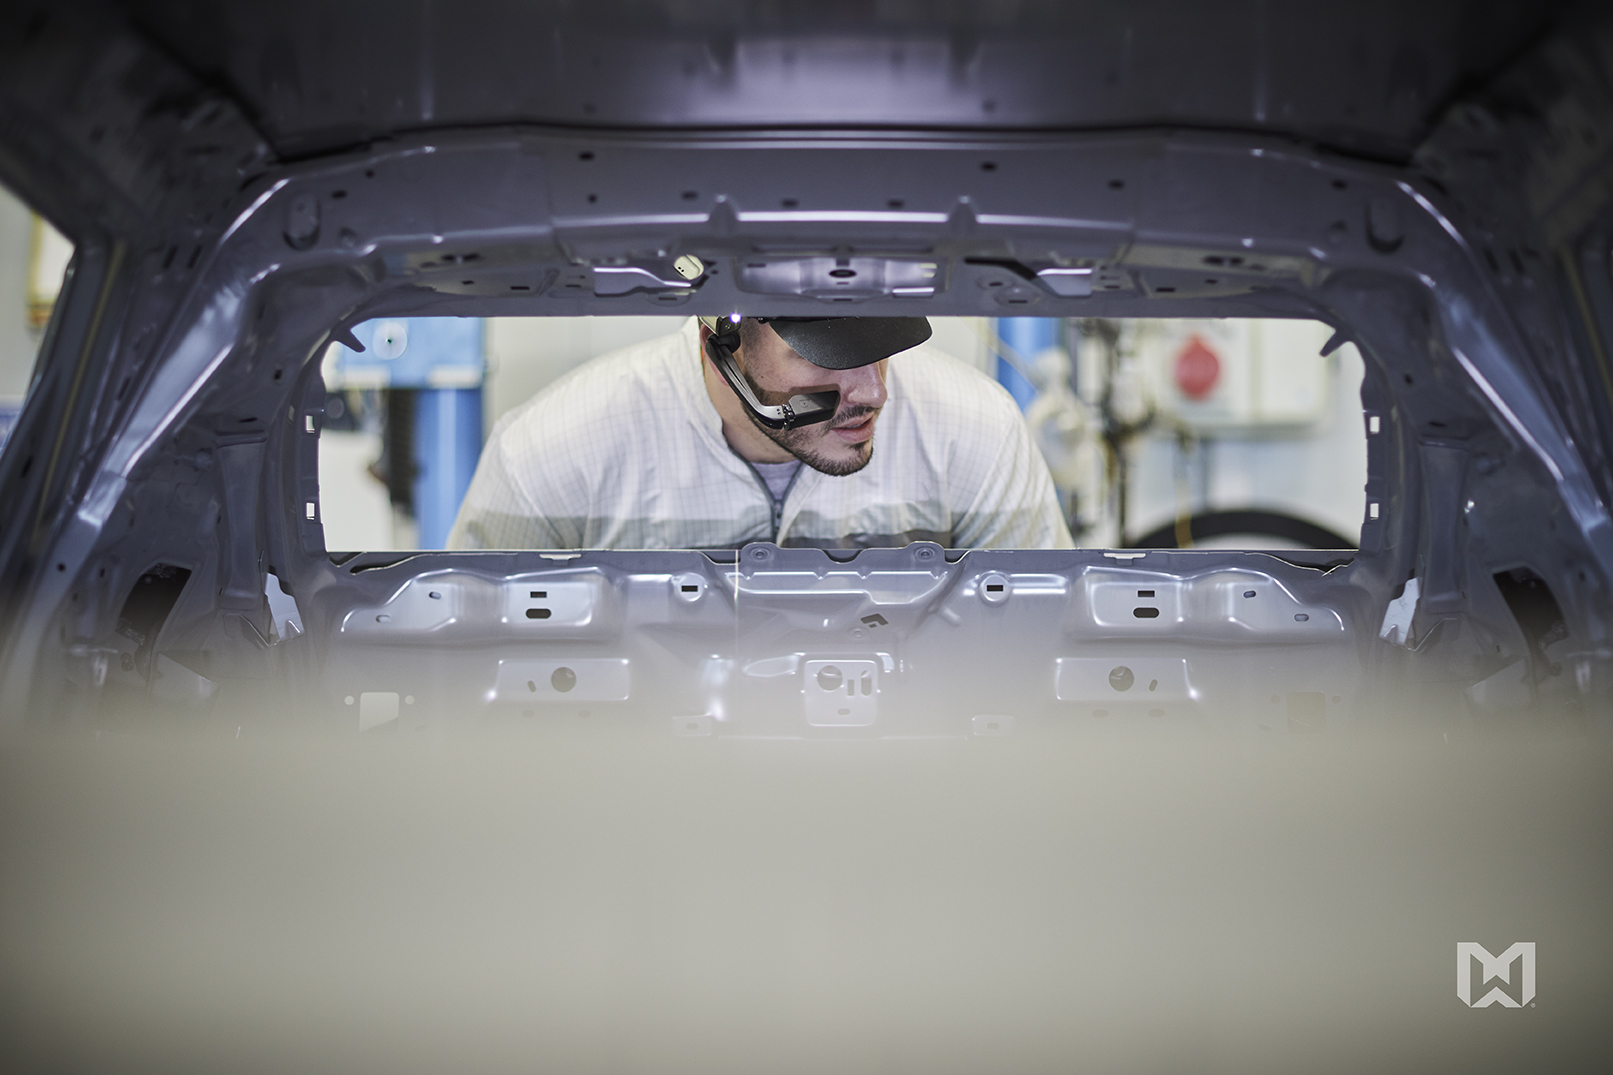 Groupe PSA worker inspects vehicle with RealWear HMT-1